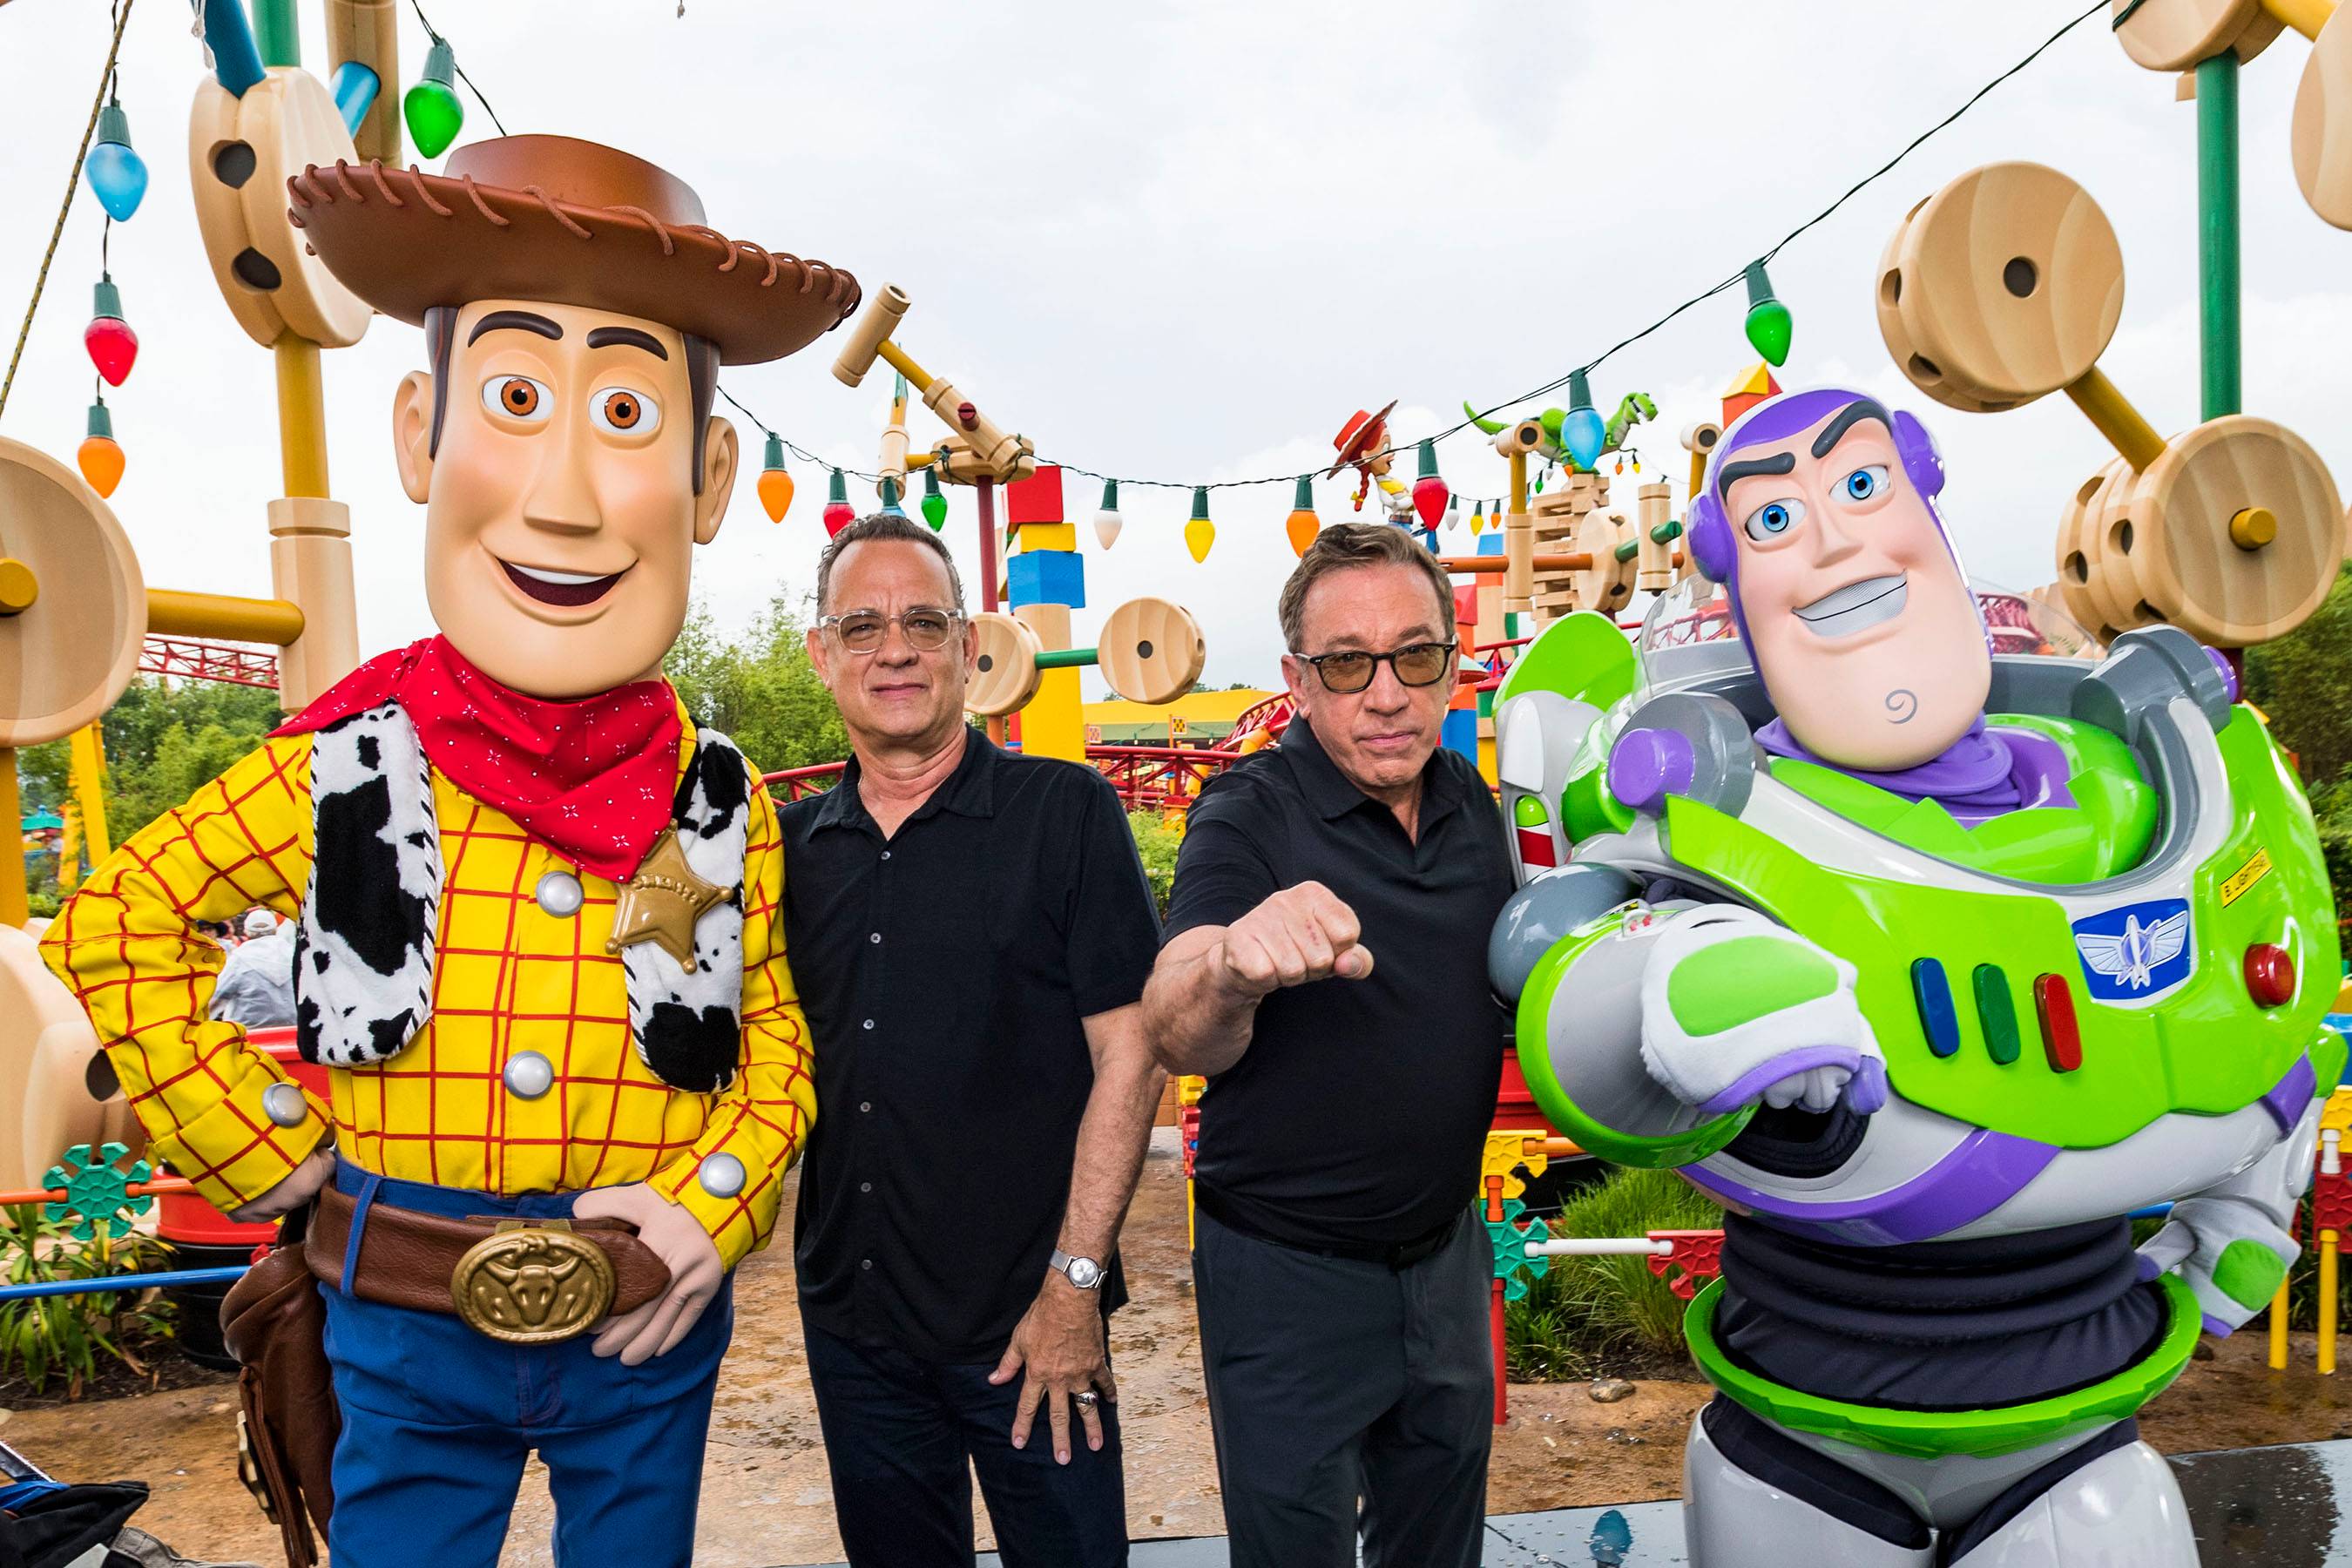 PHOTOS - Tom Hanks, Tim Allen and other stars from Toy Story 4 visit Toy Story Land at Disney's Hollywood Studios